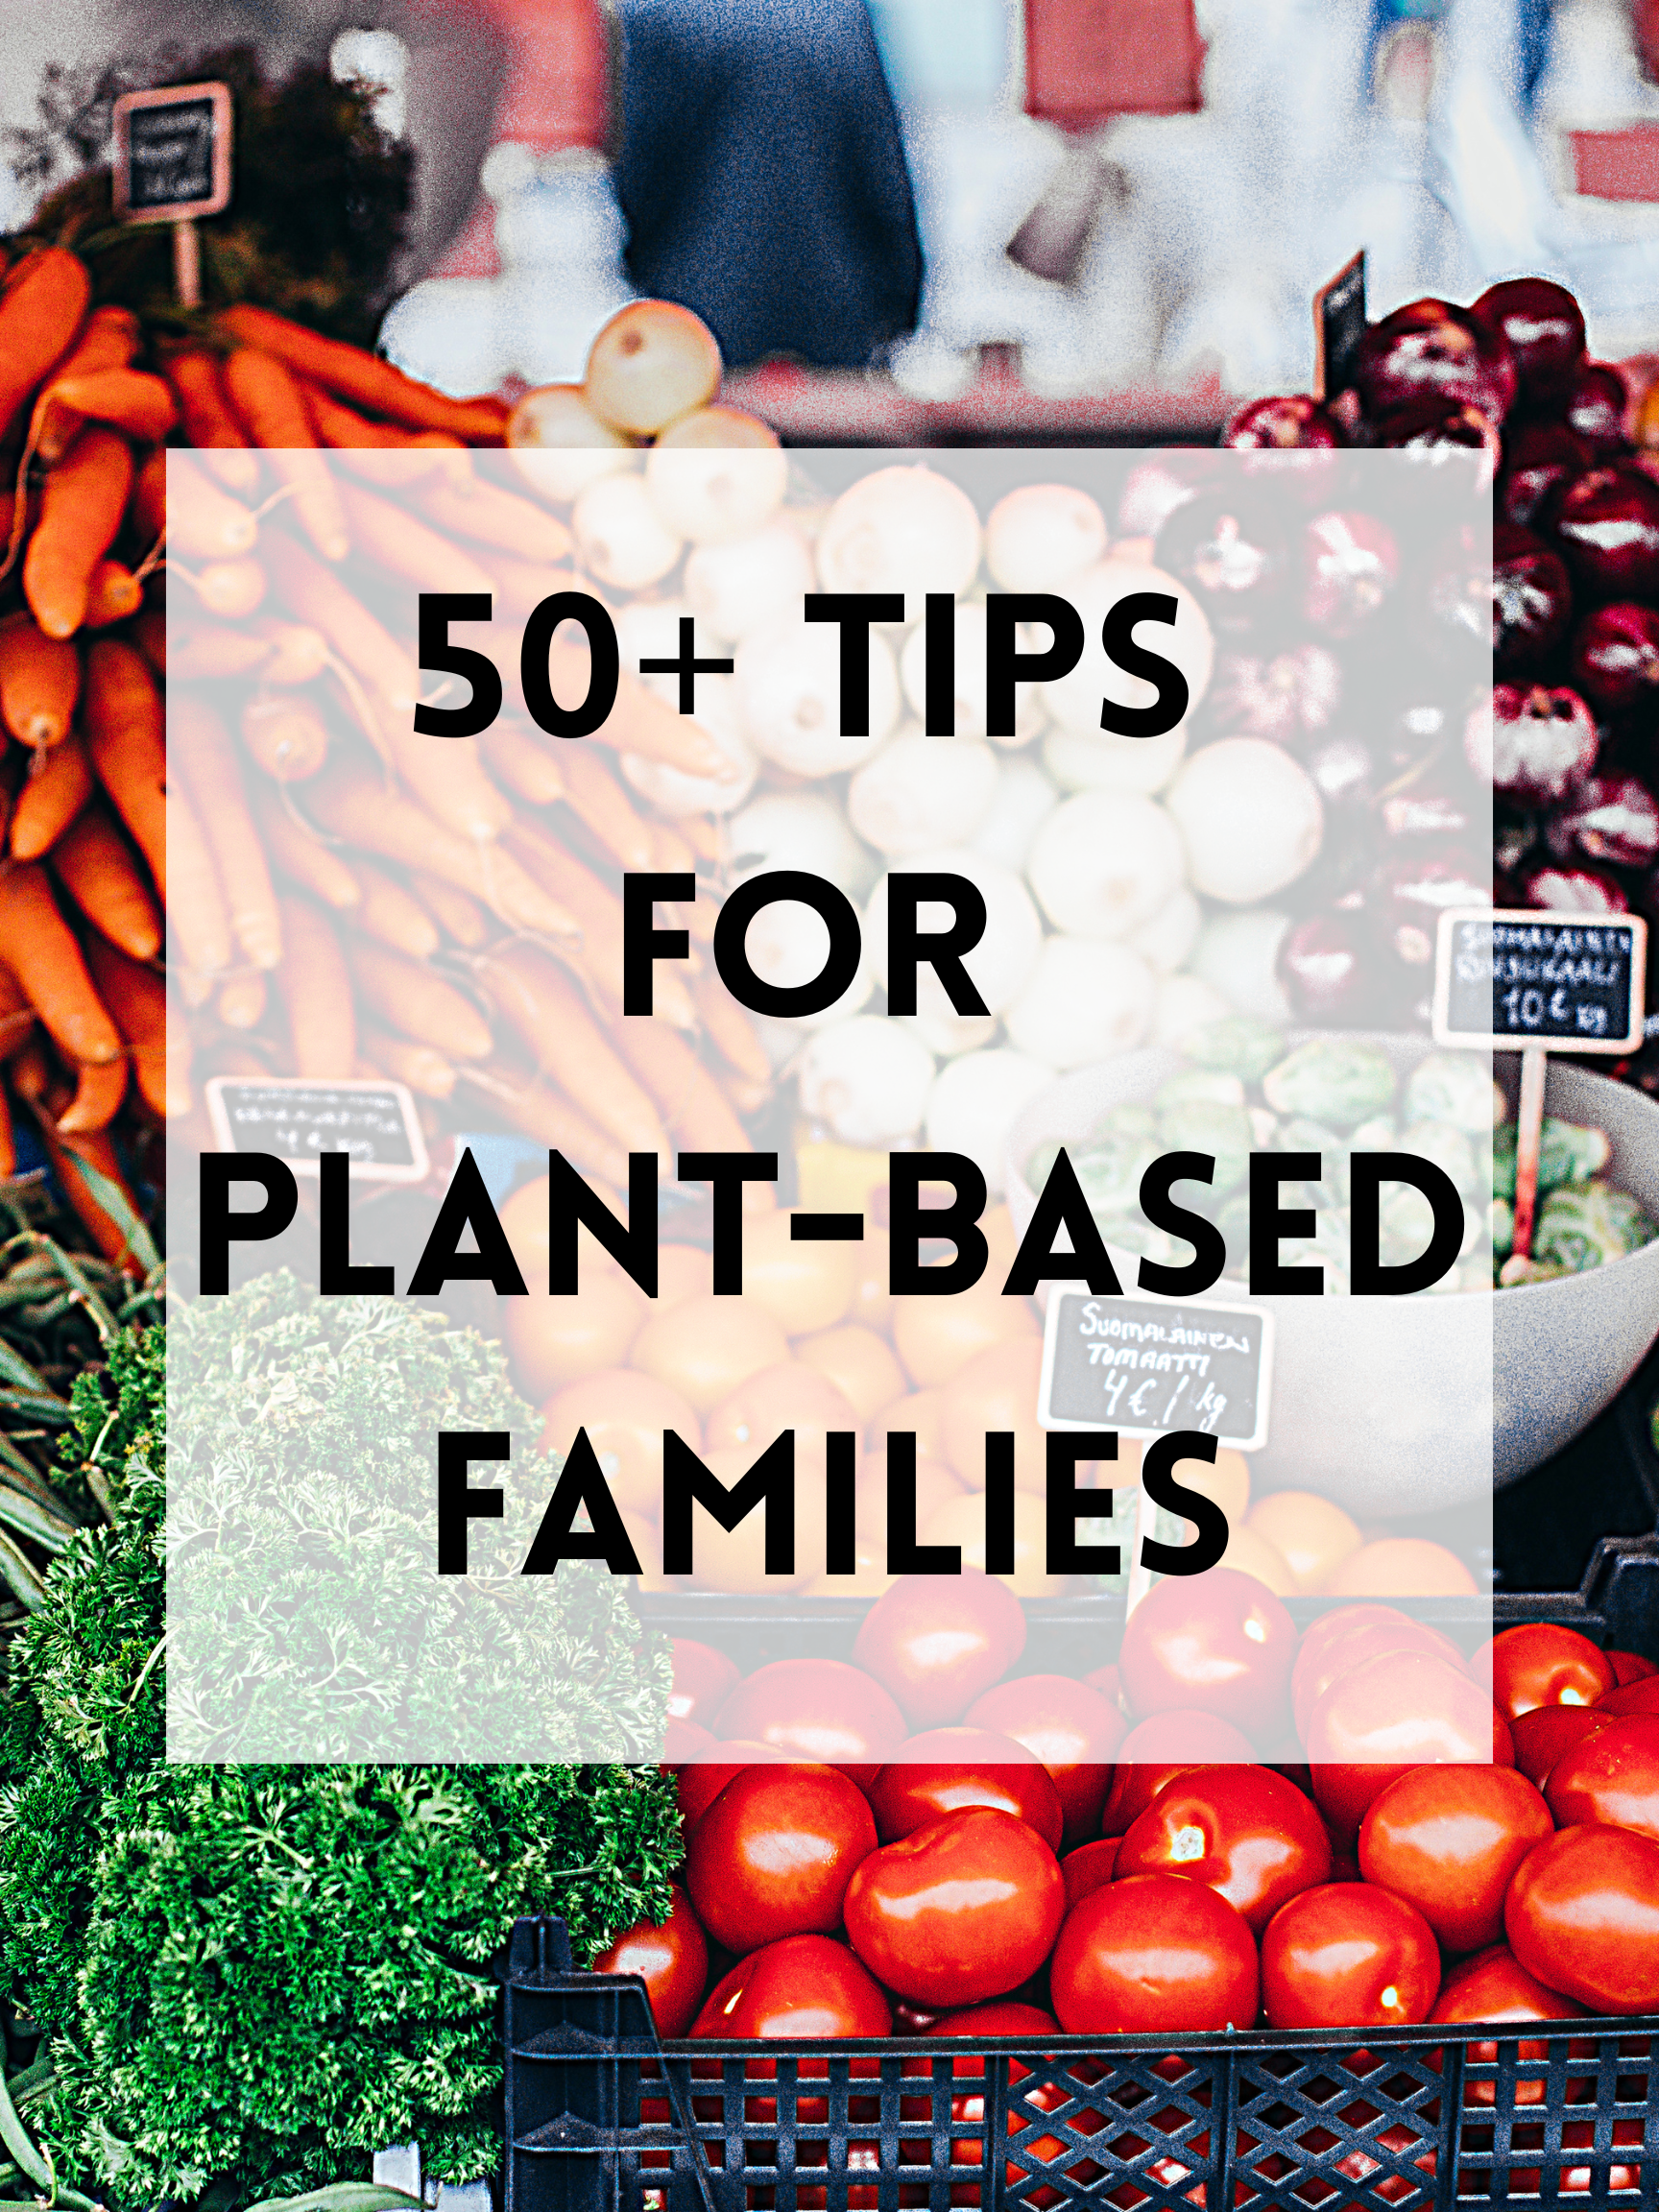 50 Tips for Plant-Based Families